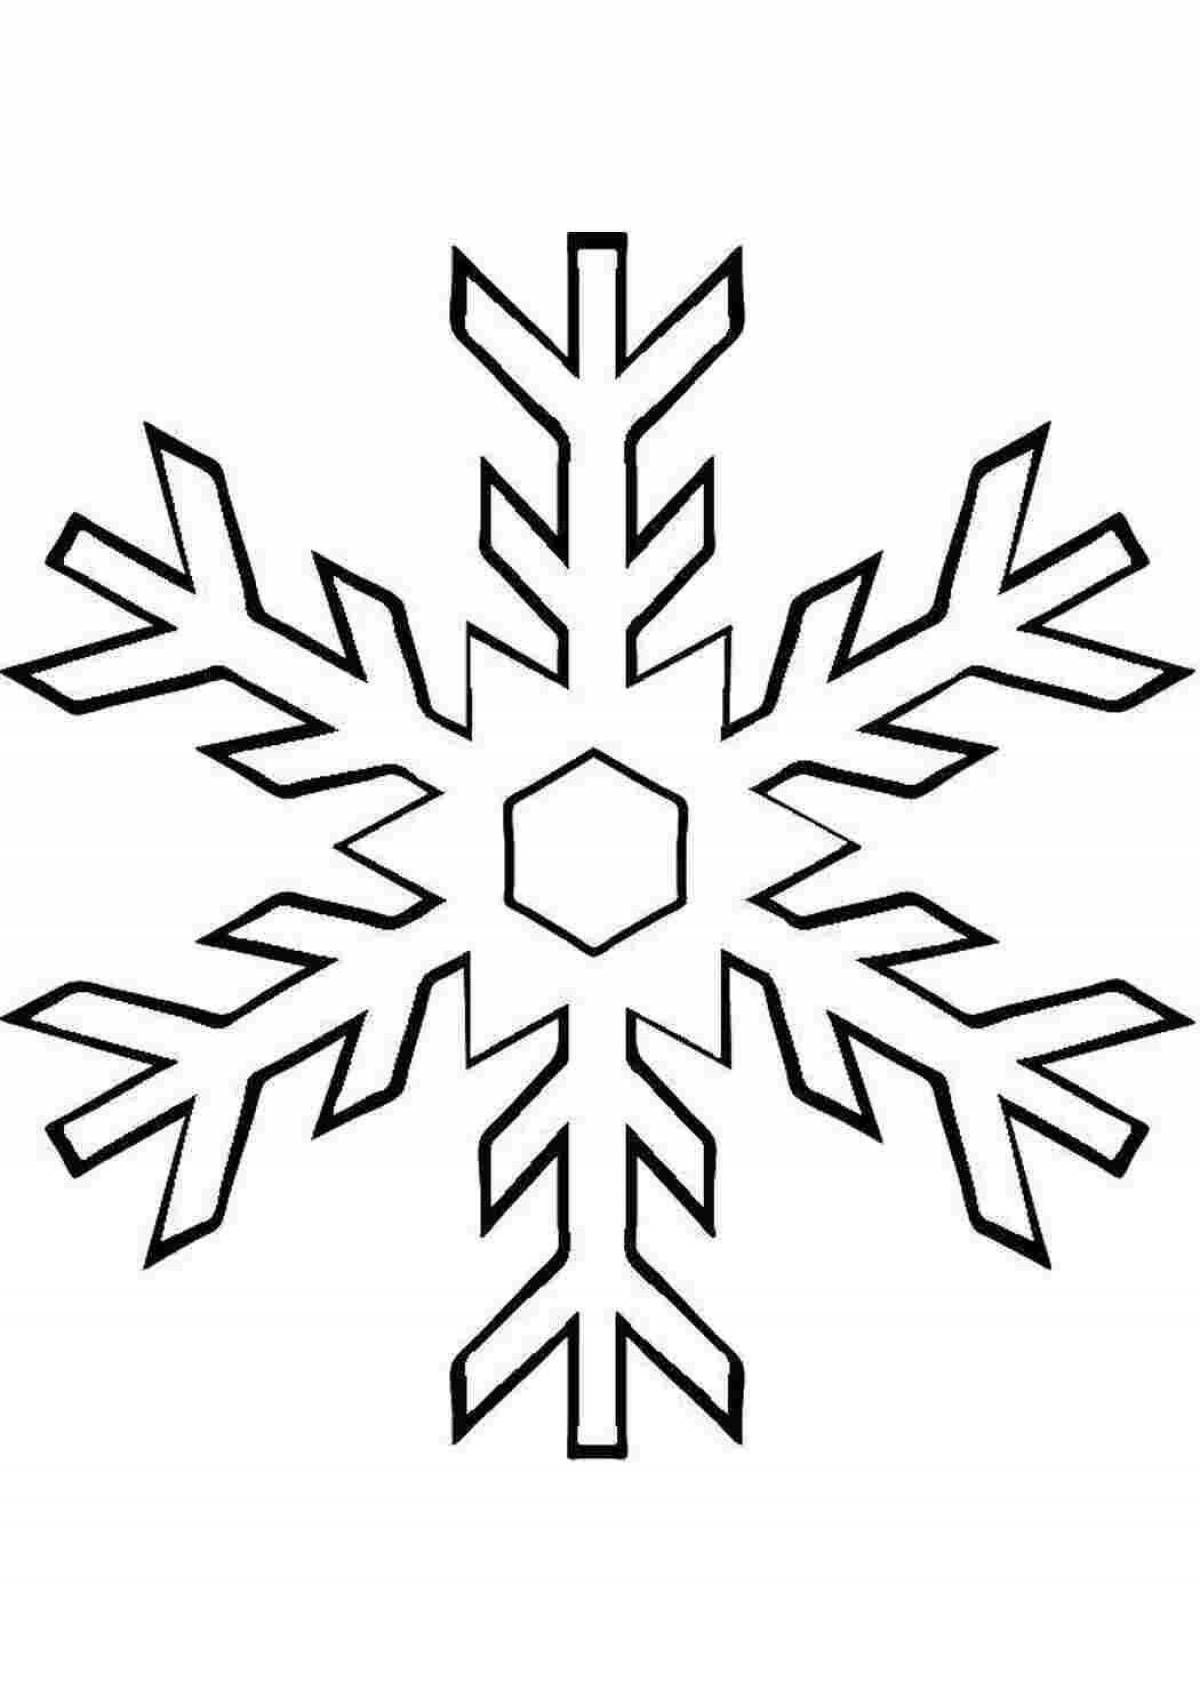 Coloring page graceful drawing of a snowflake